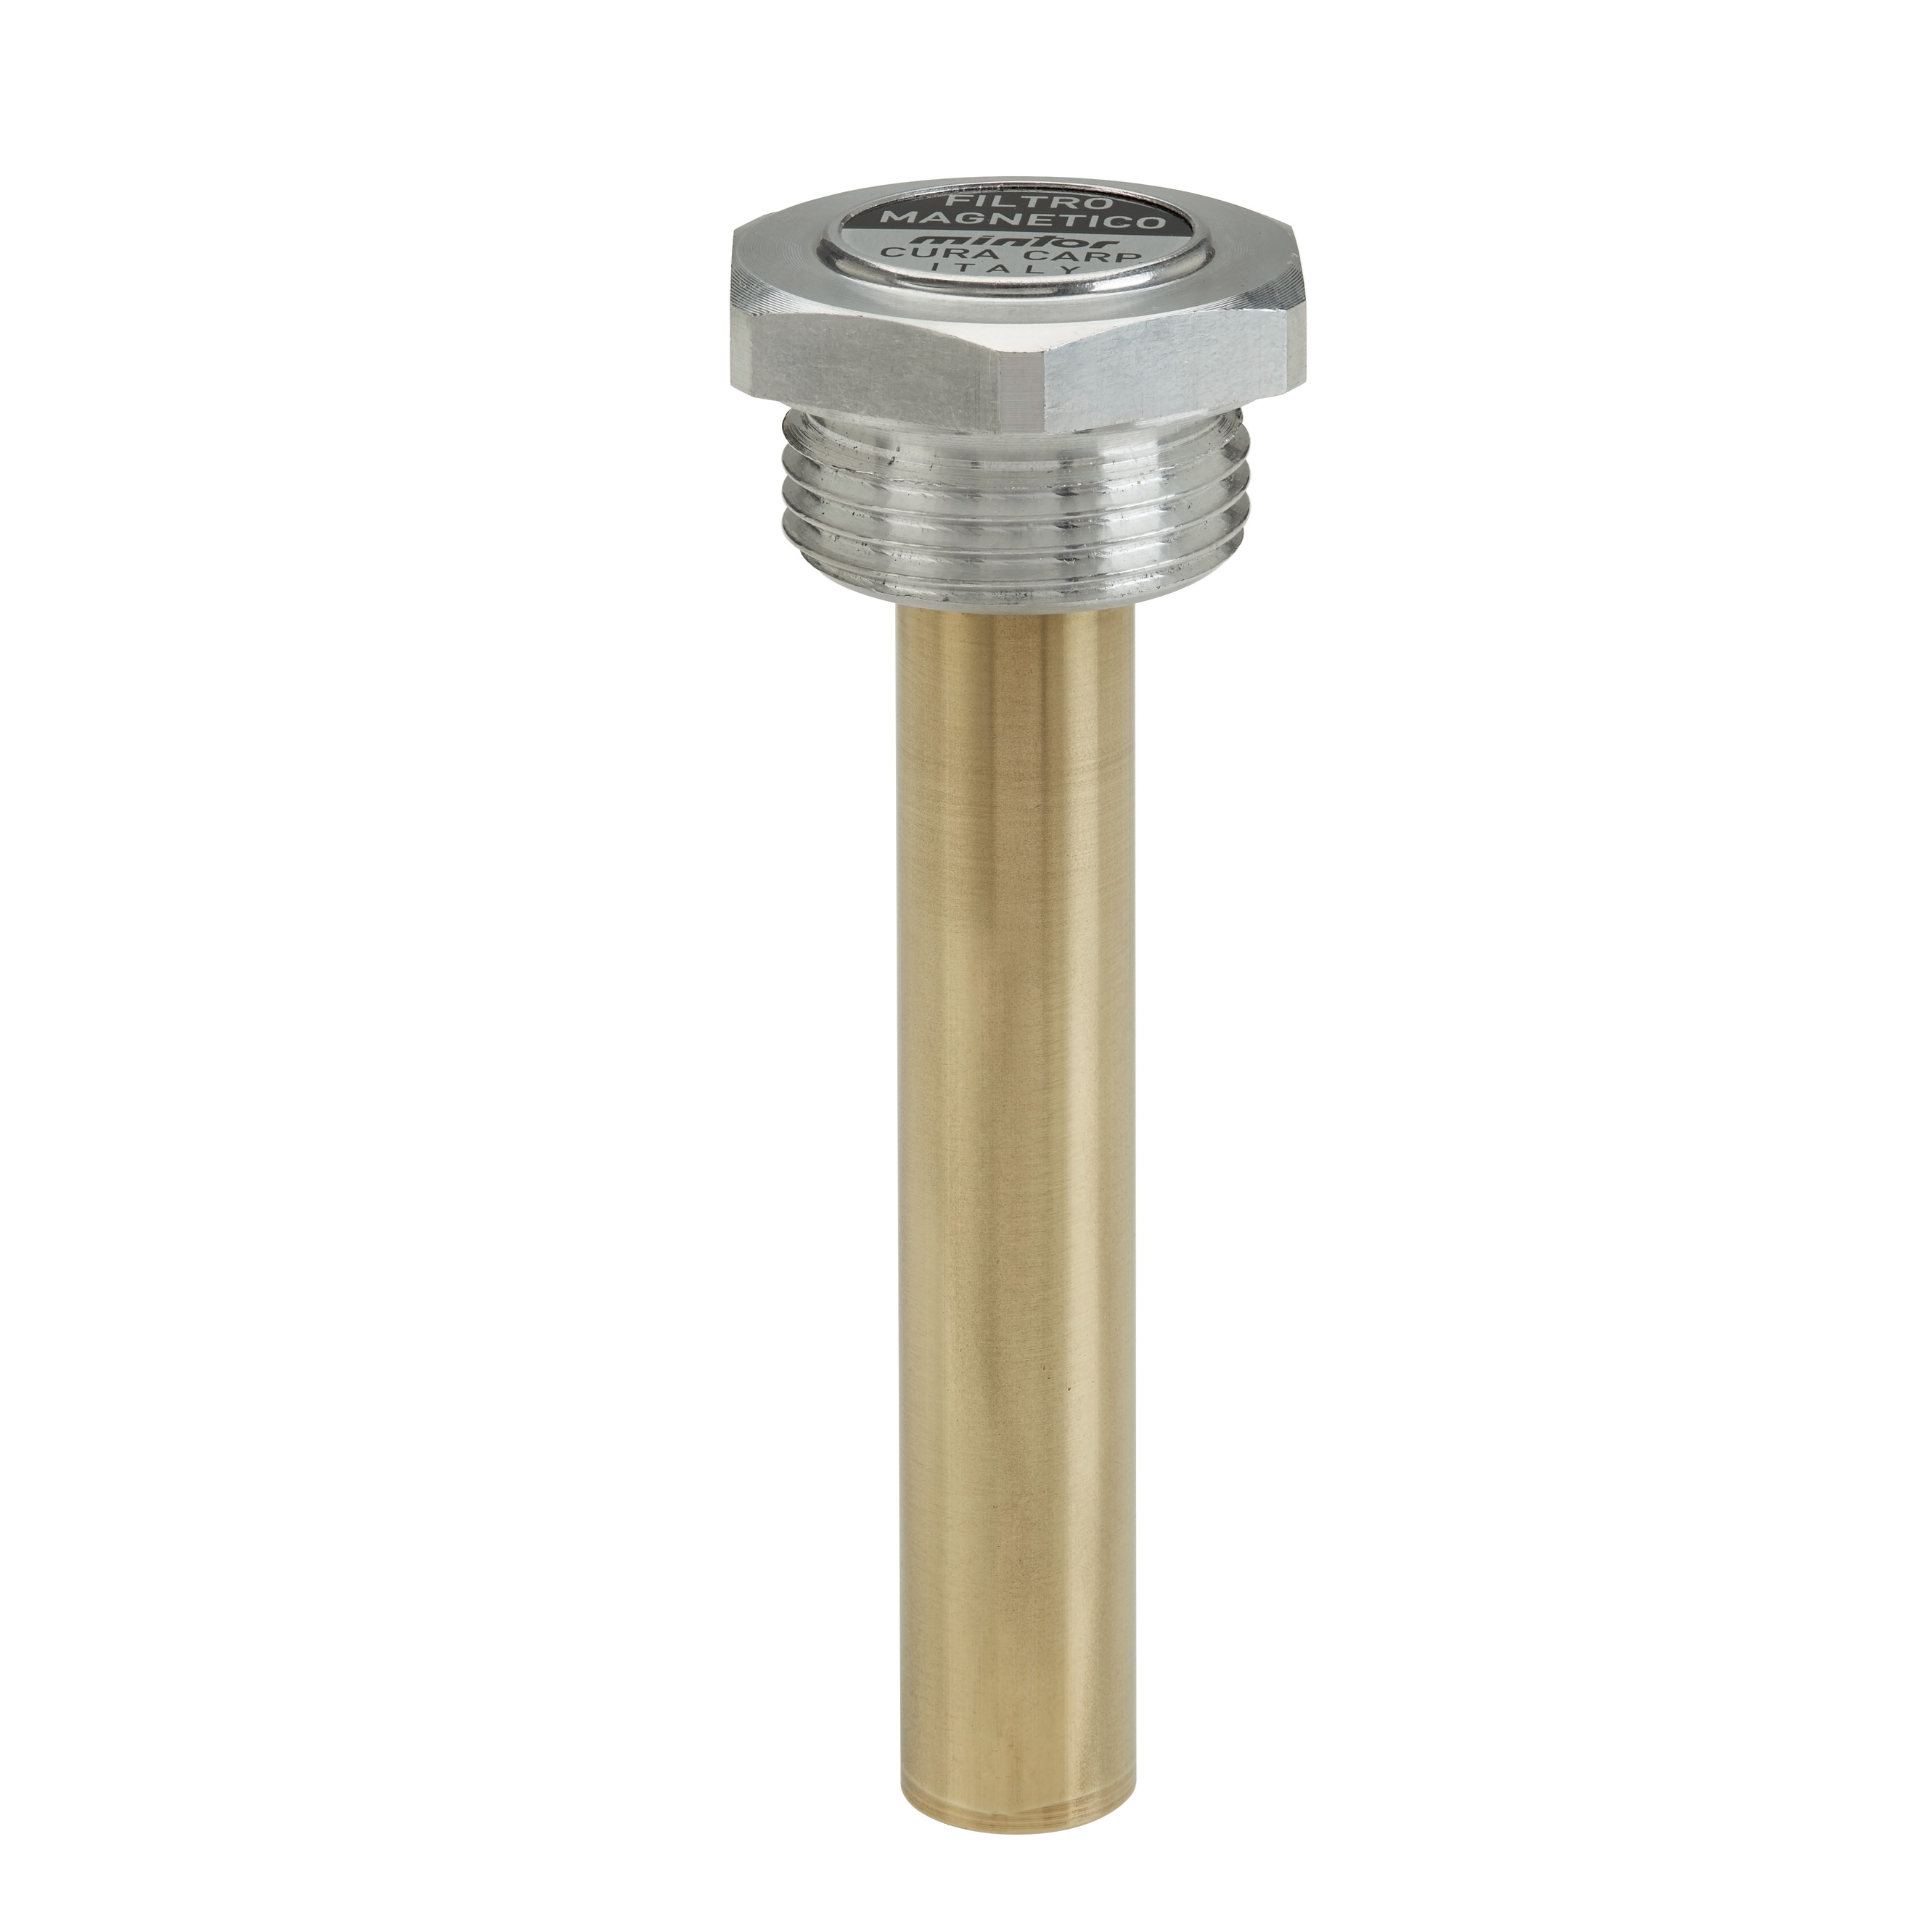 Hydraulic magnetic filter rod, 1" BSP